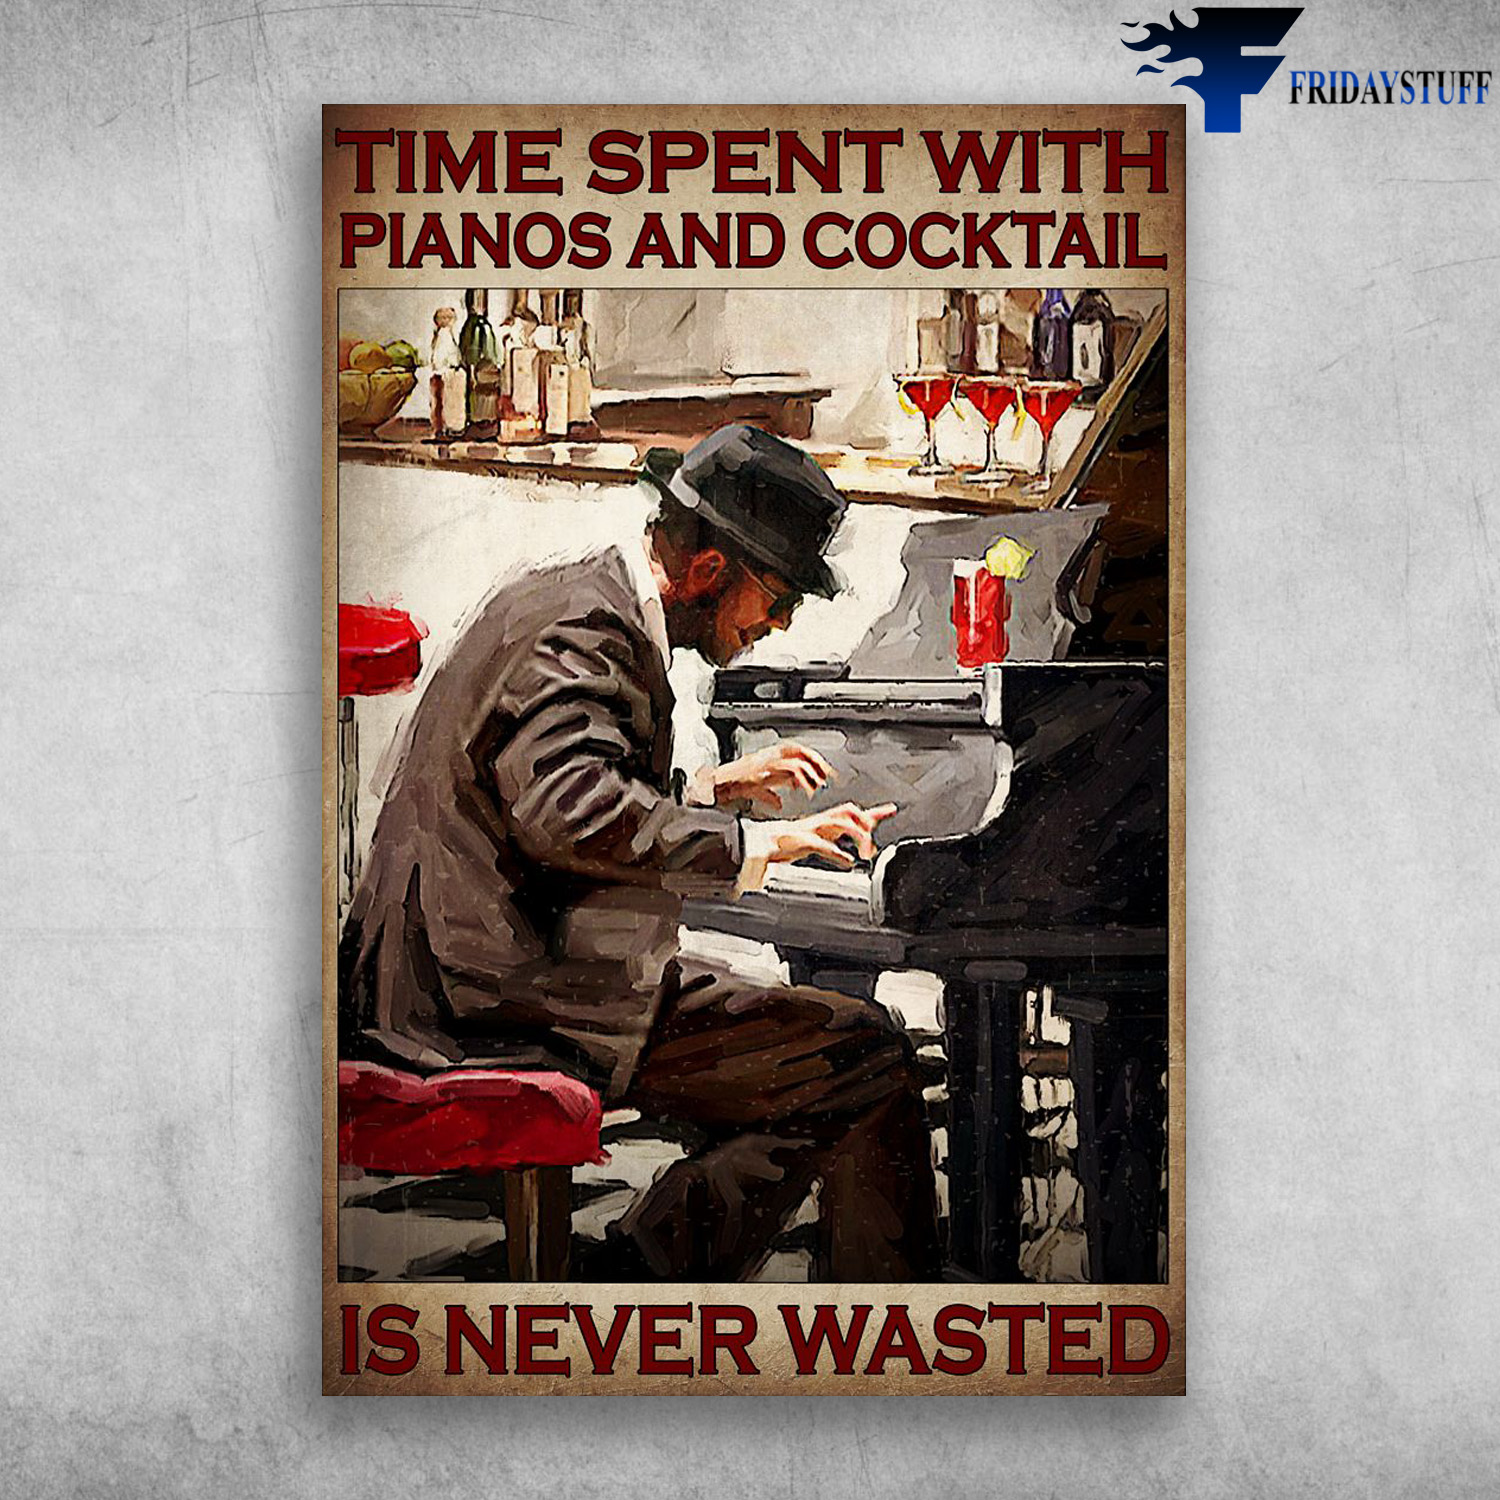 Man Playing Piano - Time Spent With Pianos And Cocktail, Is Never Wasted